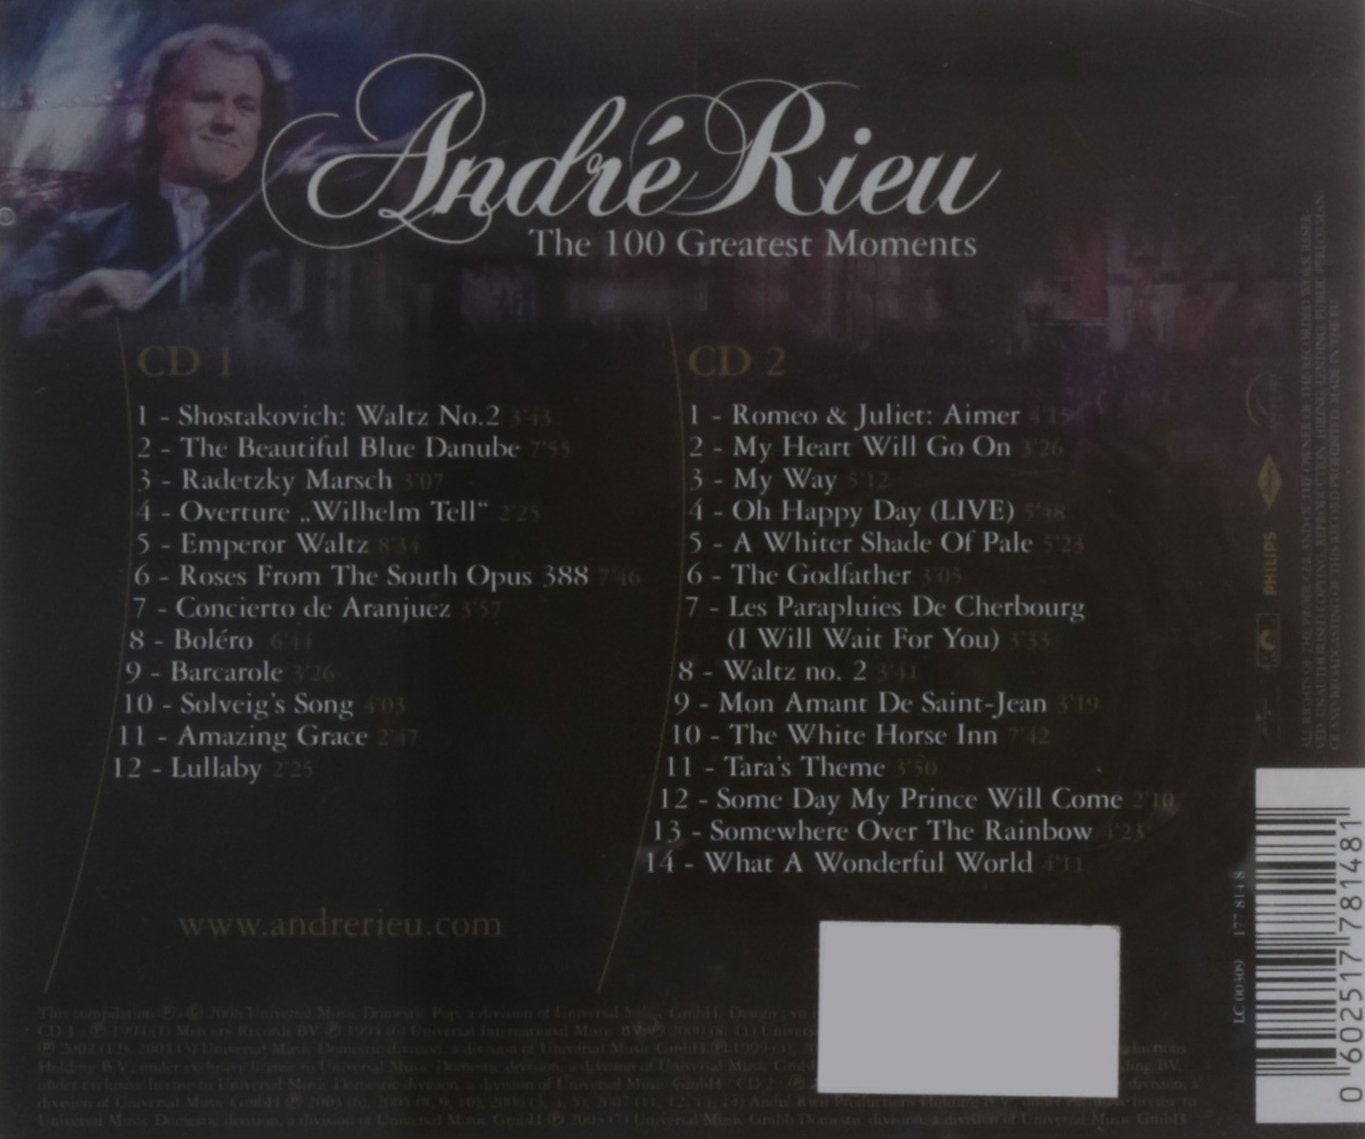 CDX2 André Rieu - The 100 Greatest Moments